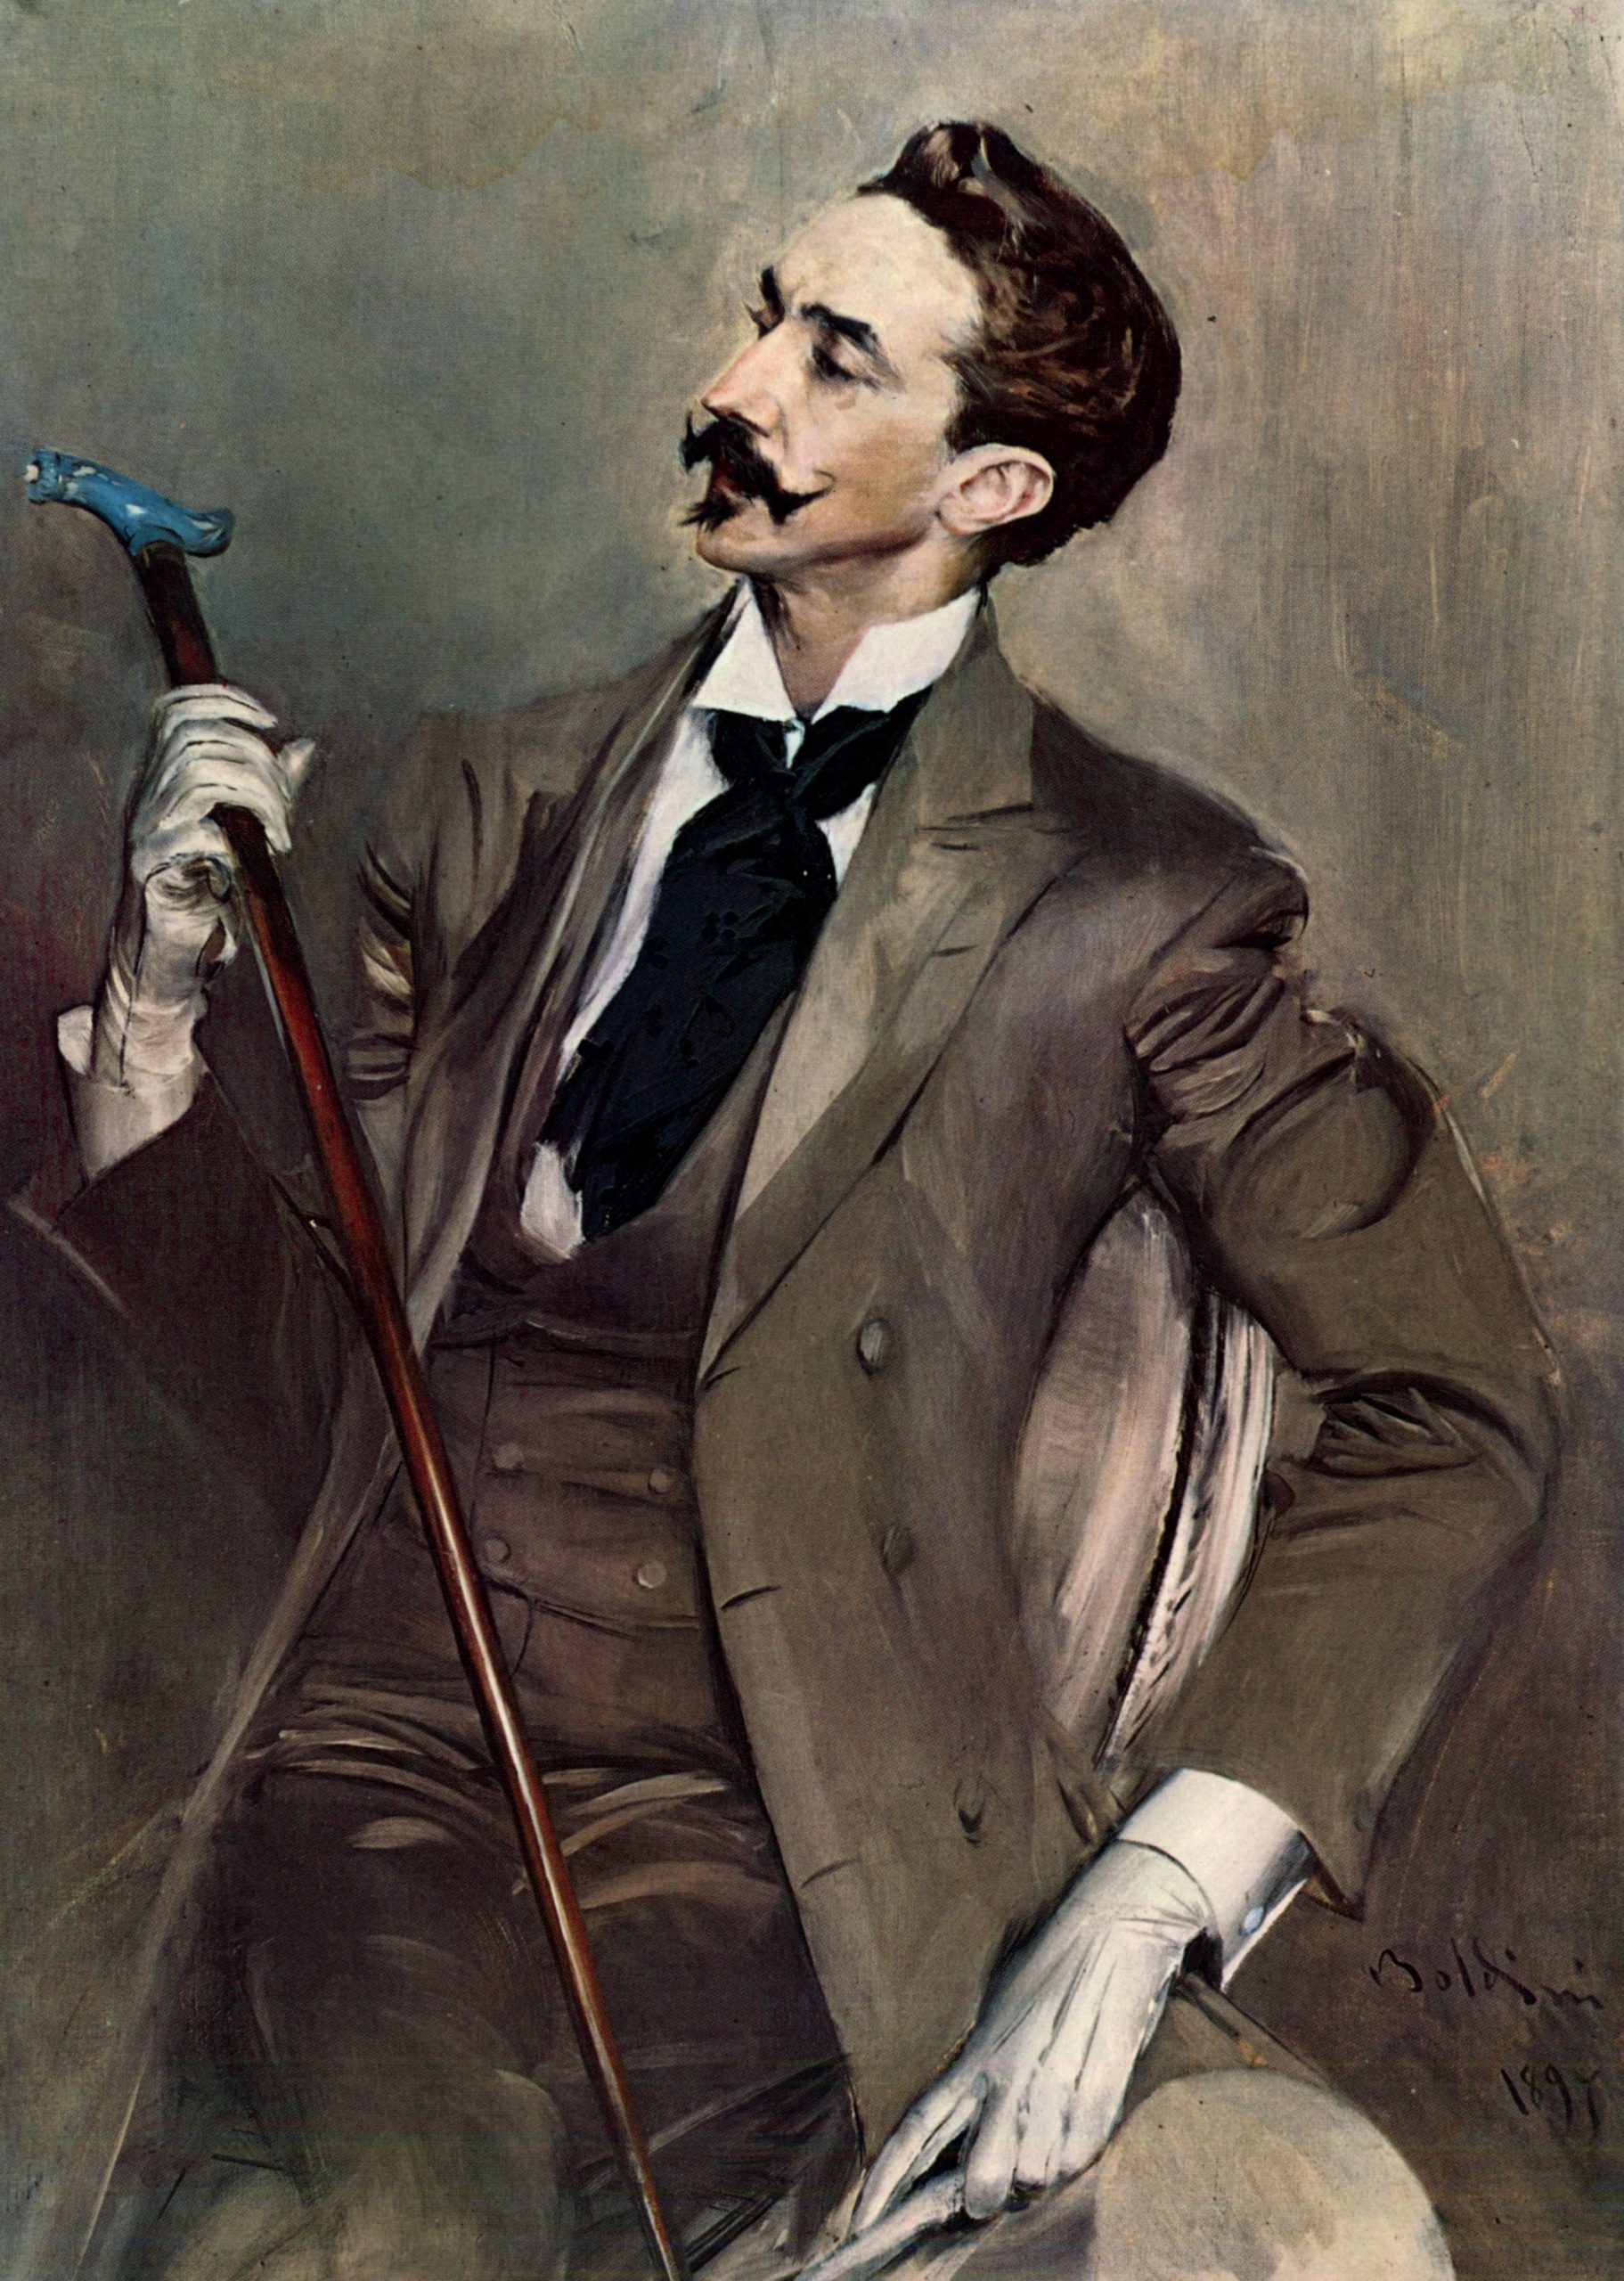 A portrait of a man wearing a suit holding a walking stick